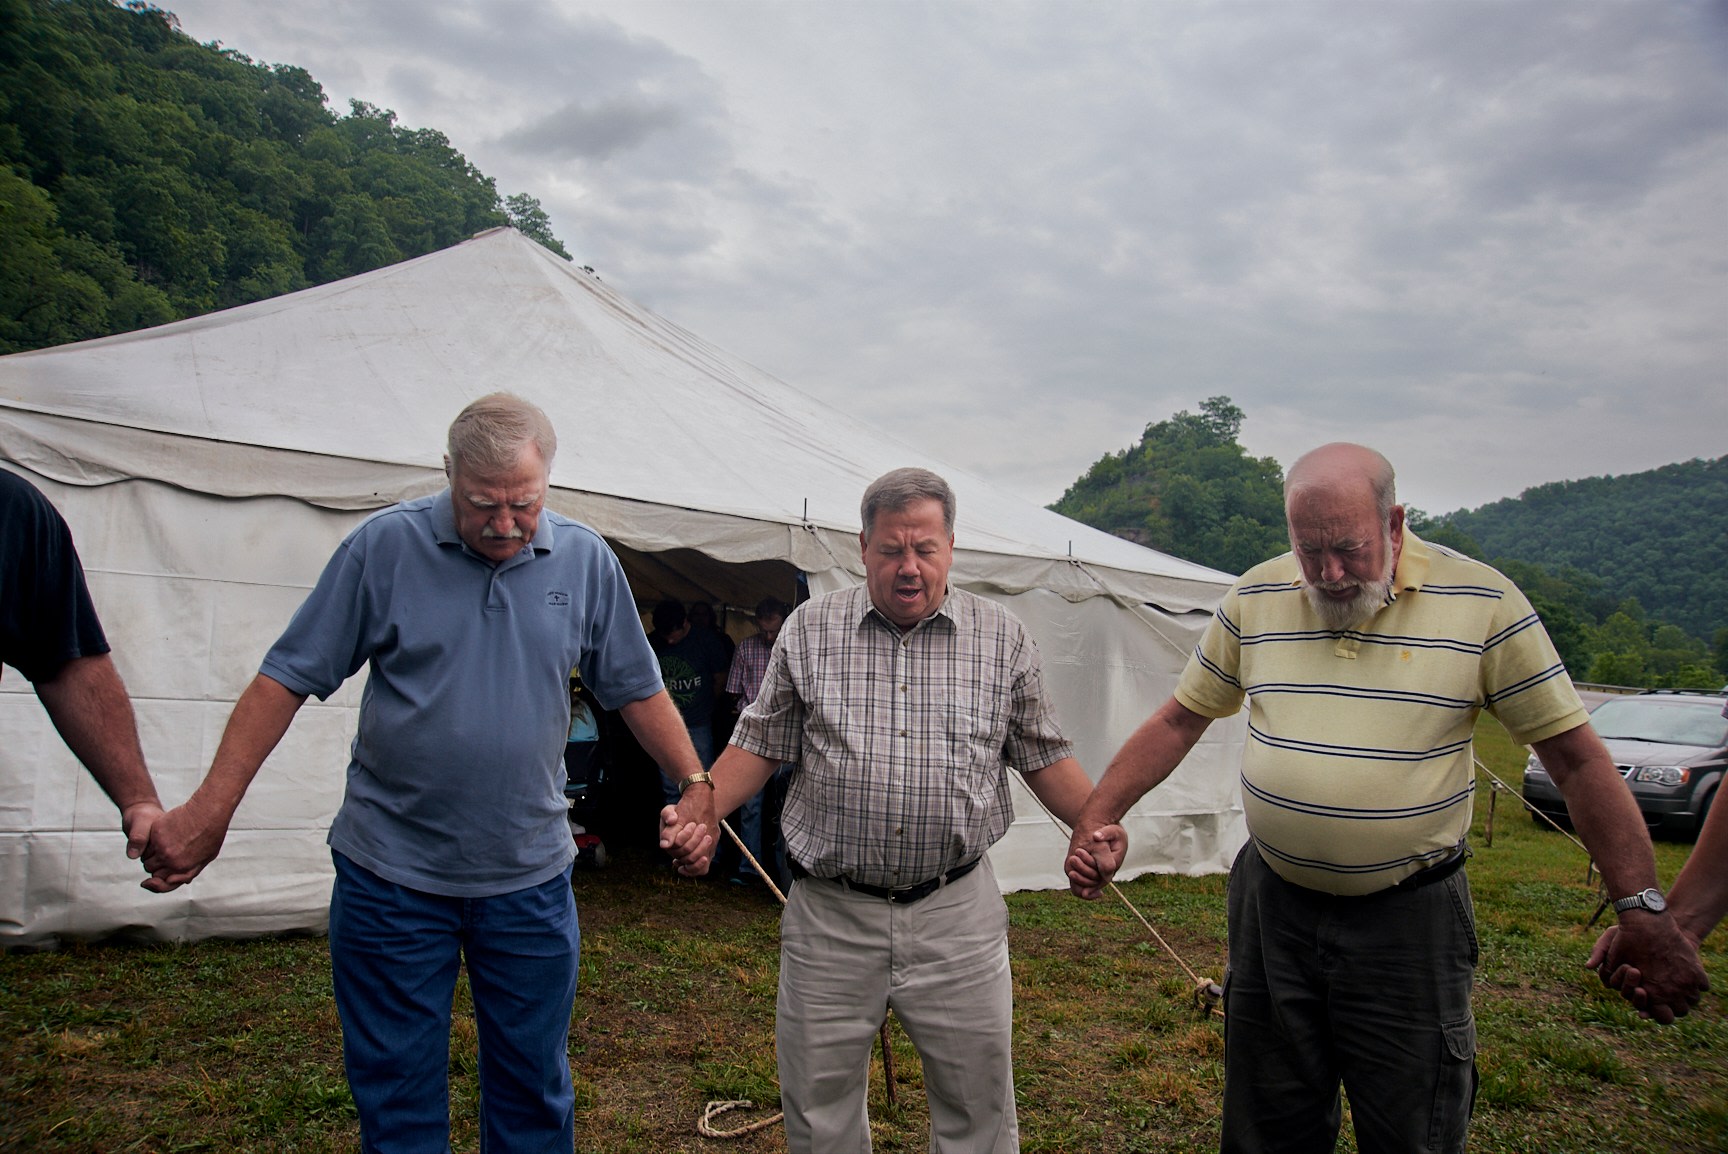 Stacy Kranitz  Pikeville, Kentcuky, 2015  Archival Pigment Print  16 x 24 inches, Edition of 7  27 x 40 inches, Edition of 3, Men holding hands in a prayer circle.